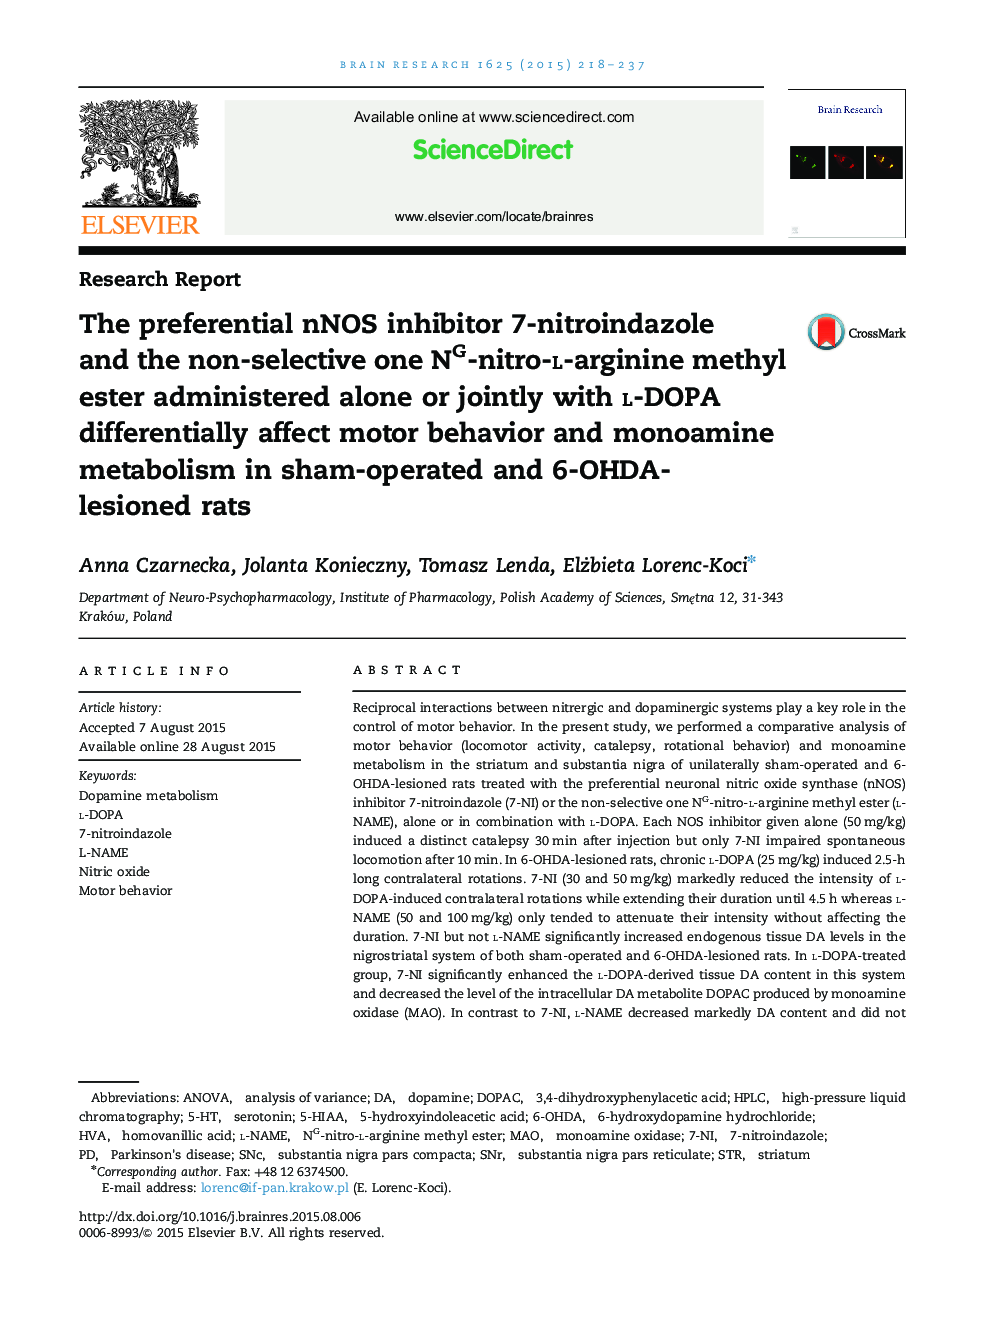 Research ReportThe preferential nNOS inhibitor 7-nitroindazole and the non-selective one NG-nitro-l-arginine methyl ester administered alone or jointly with l-DOPA differentially affect motor behavior and monoamine metabolism in sham-operated and 6-OHDA-l